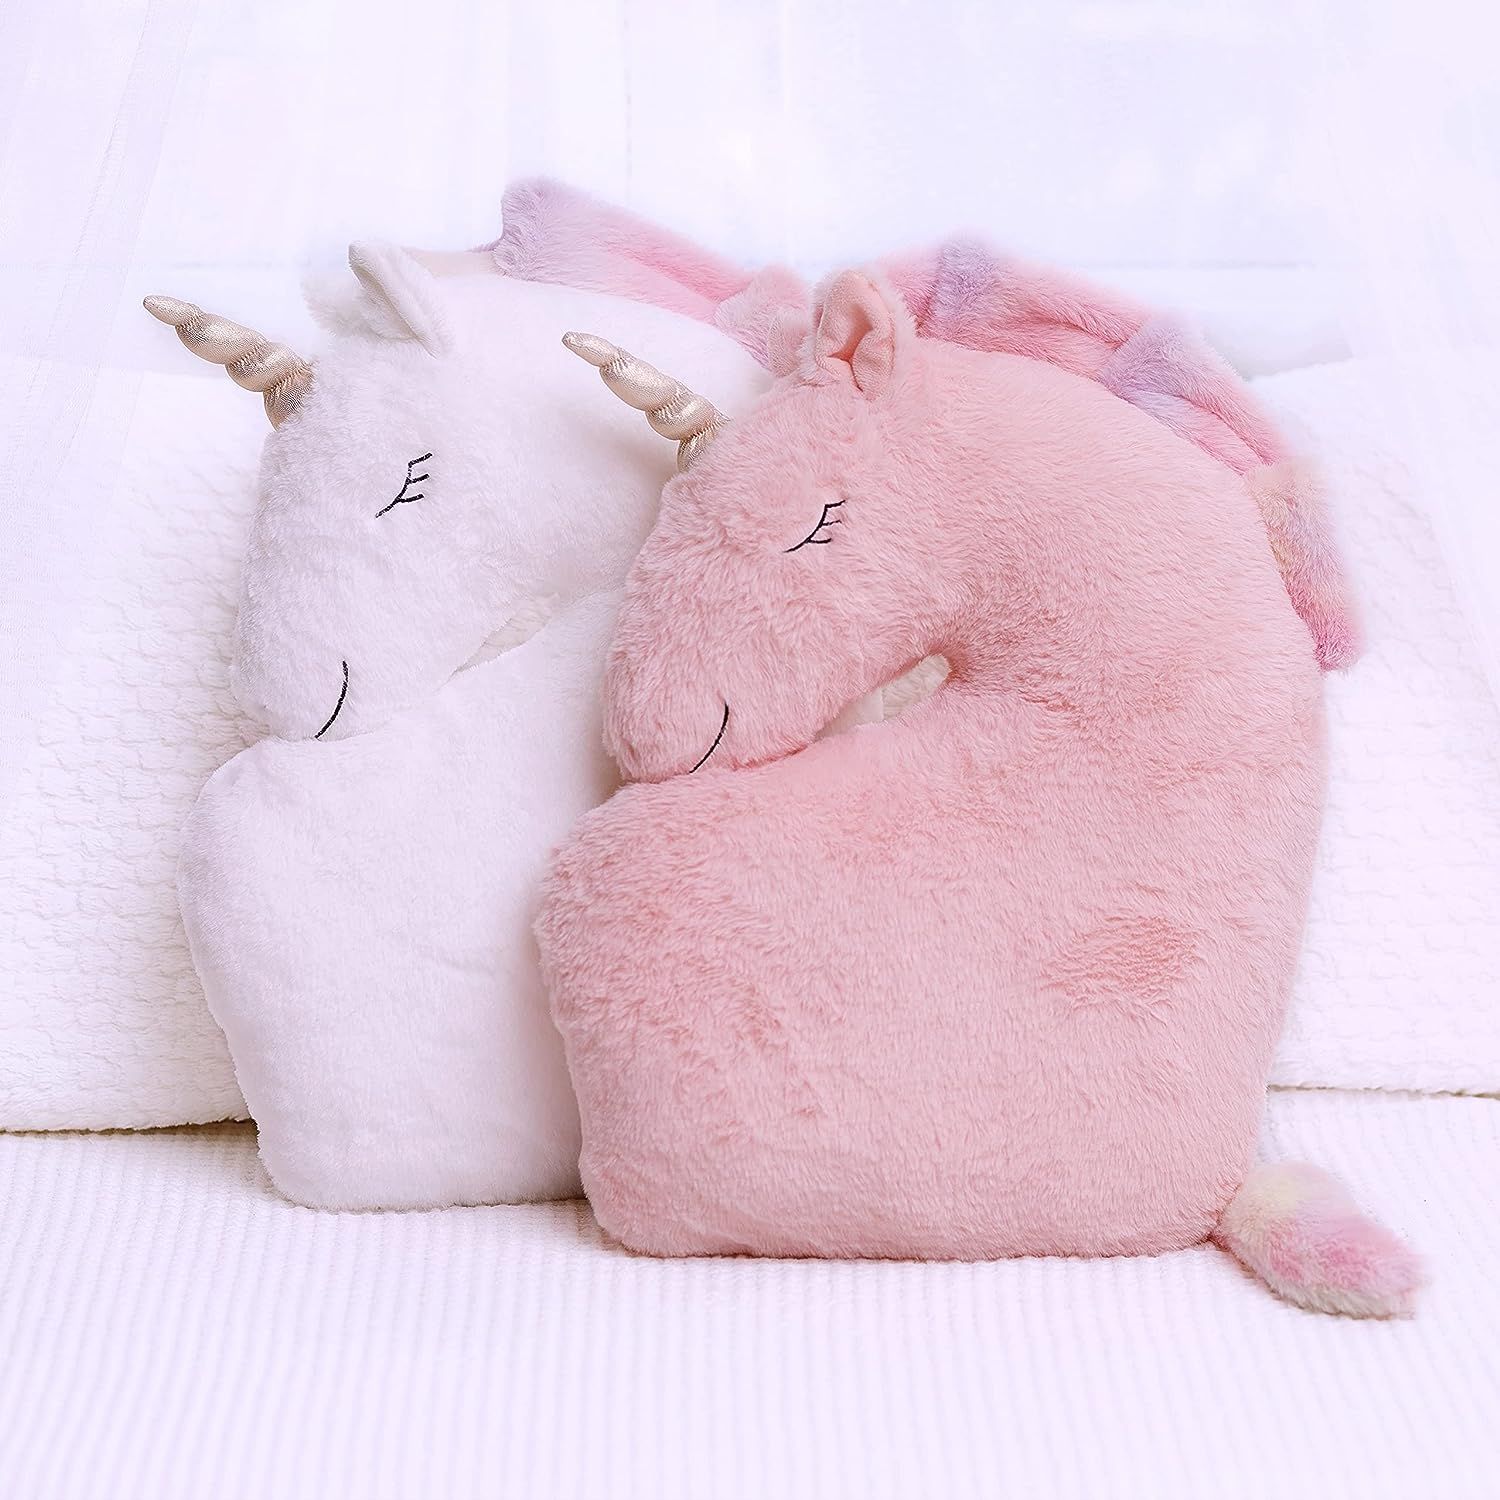 PERFECTTO Set of 2 Decorative Unicorn Pillows for Girls Kids Room. White and Pink Fluffy Pillows.... | Amazon (US)